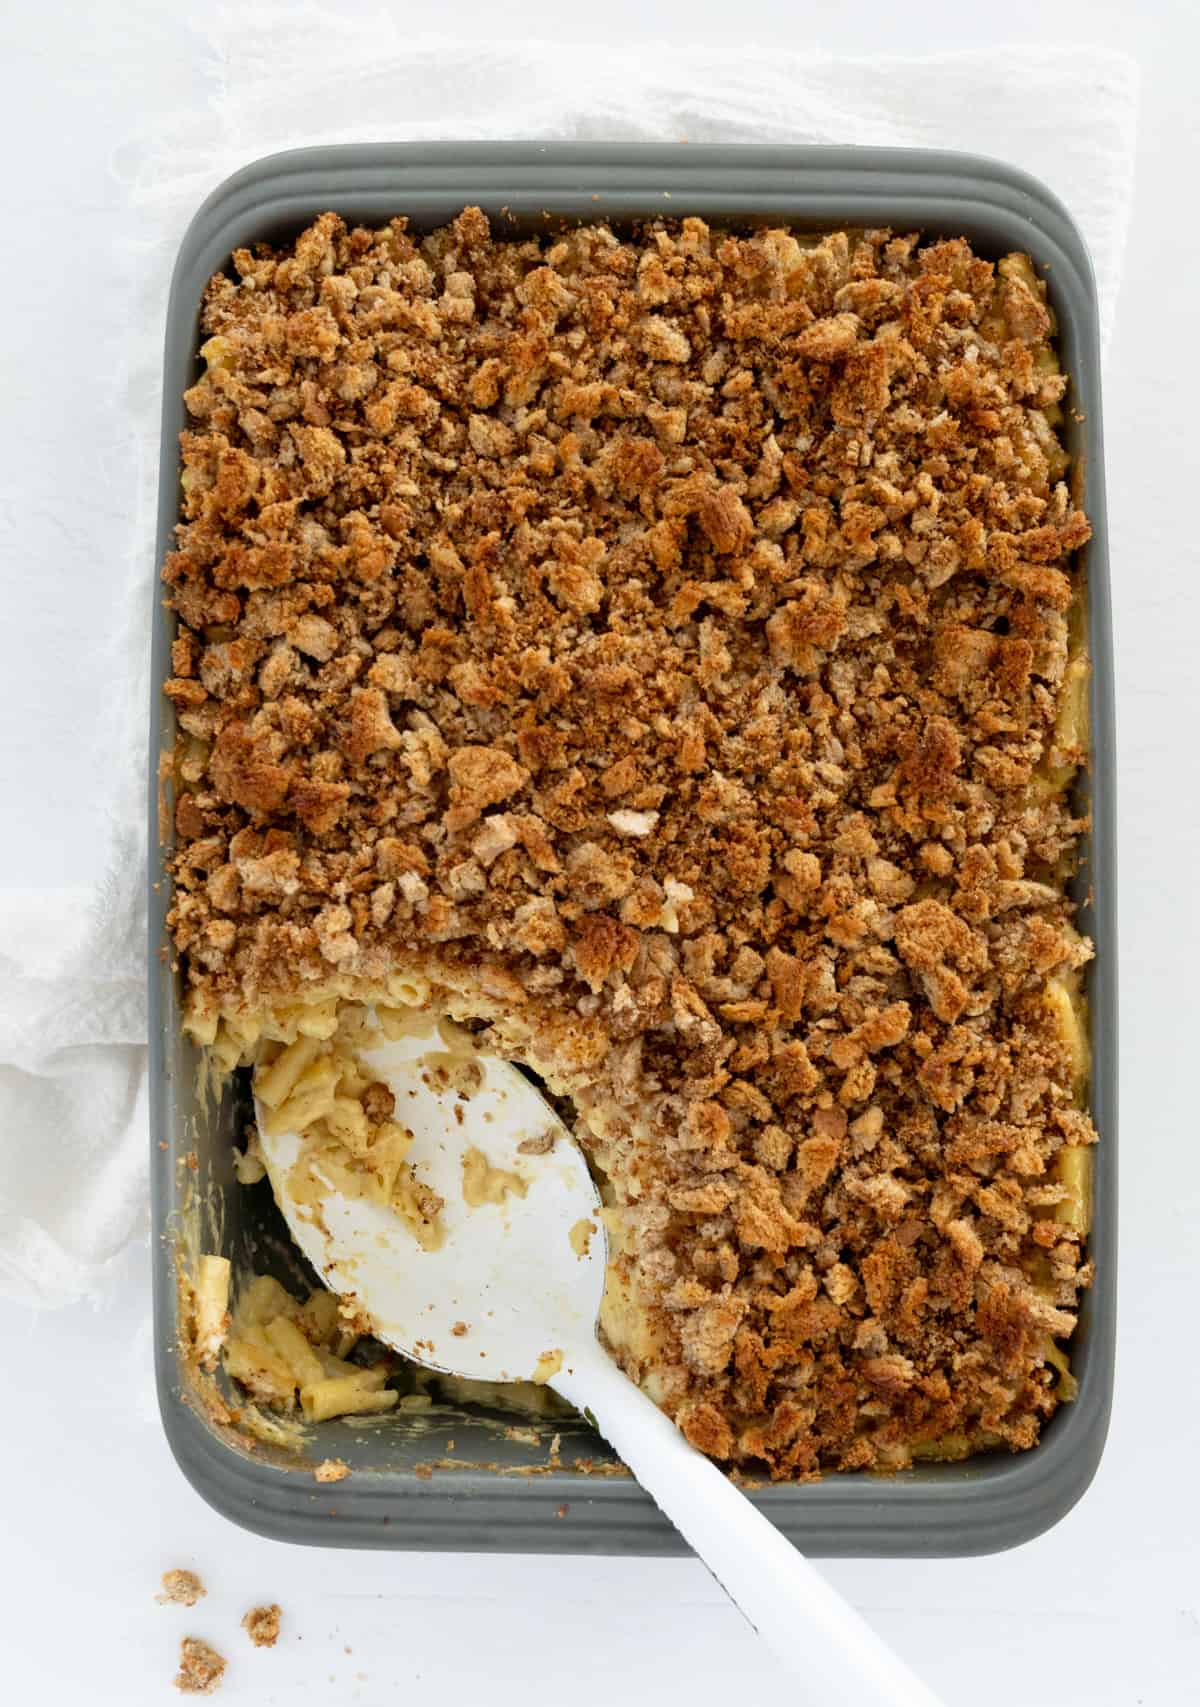 a casserole dish filled with vegan baked mac and cheese topped with bread crumbs